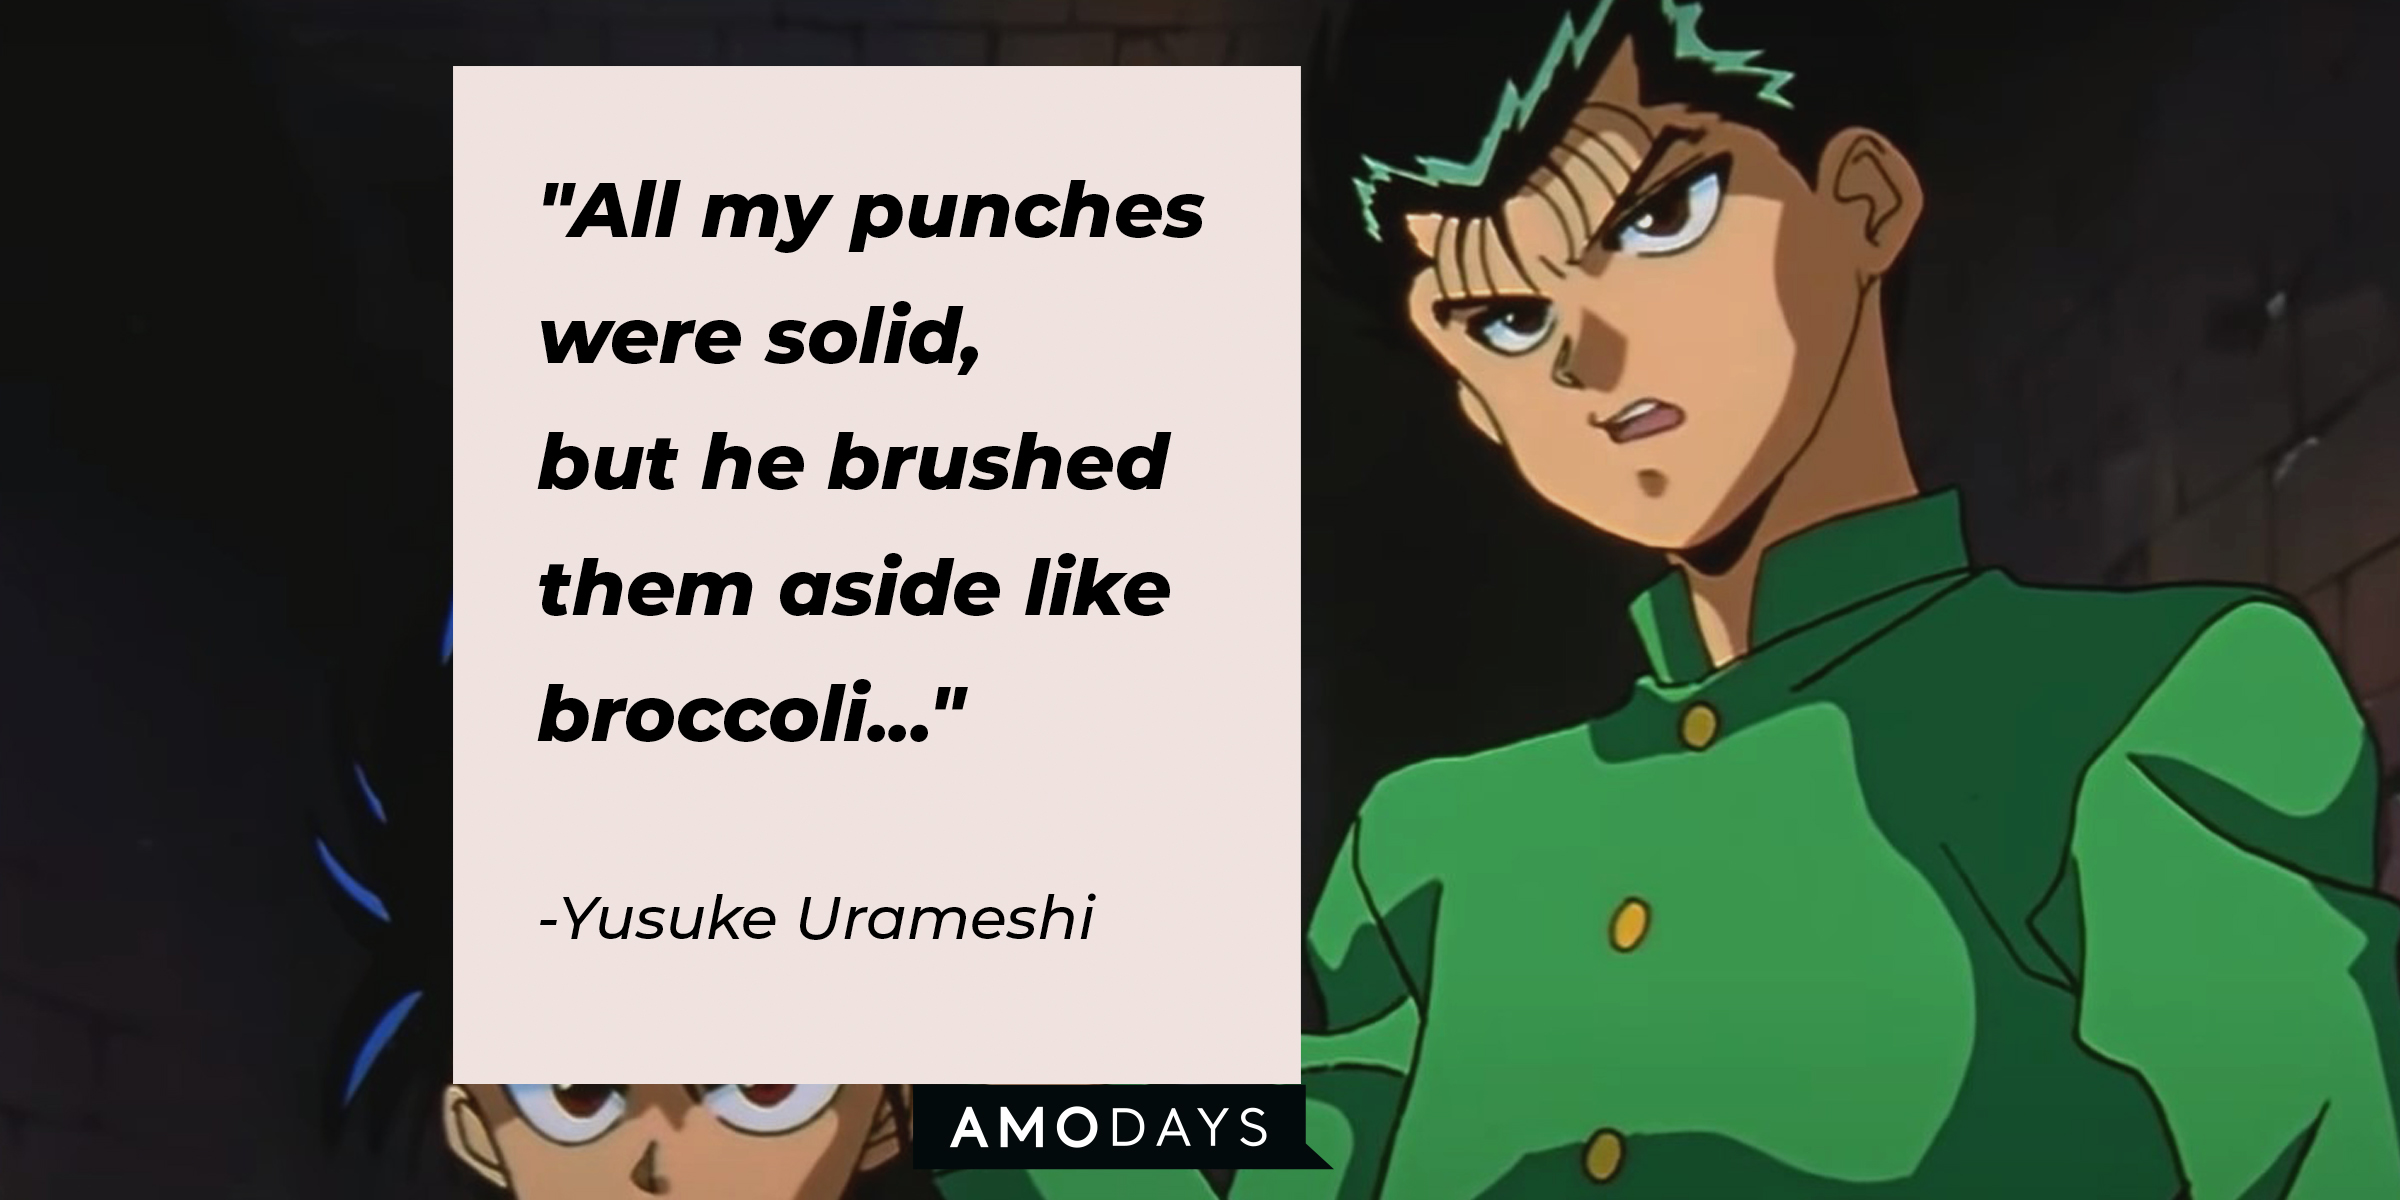 Photo of Yusuke Urameshi with his quote: "All my punches were solid, but he brushed them aside like broccoli ..." | Source: Facebook.com/watchyuyuhakusho